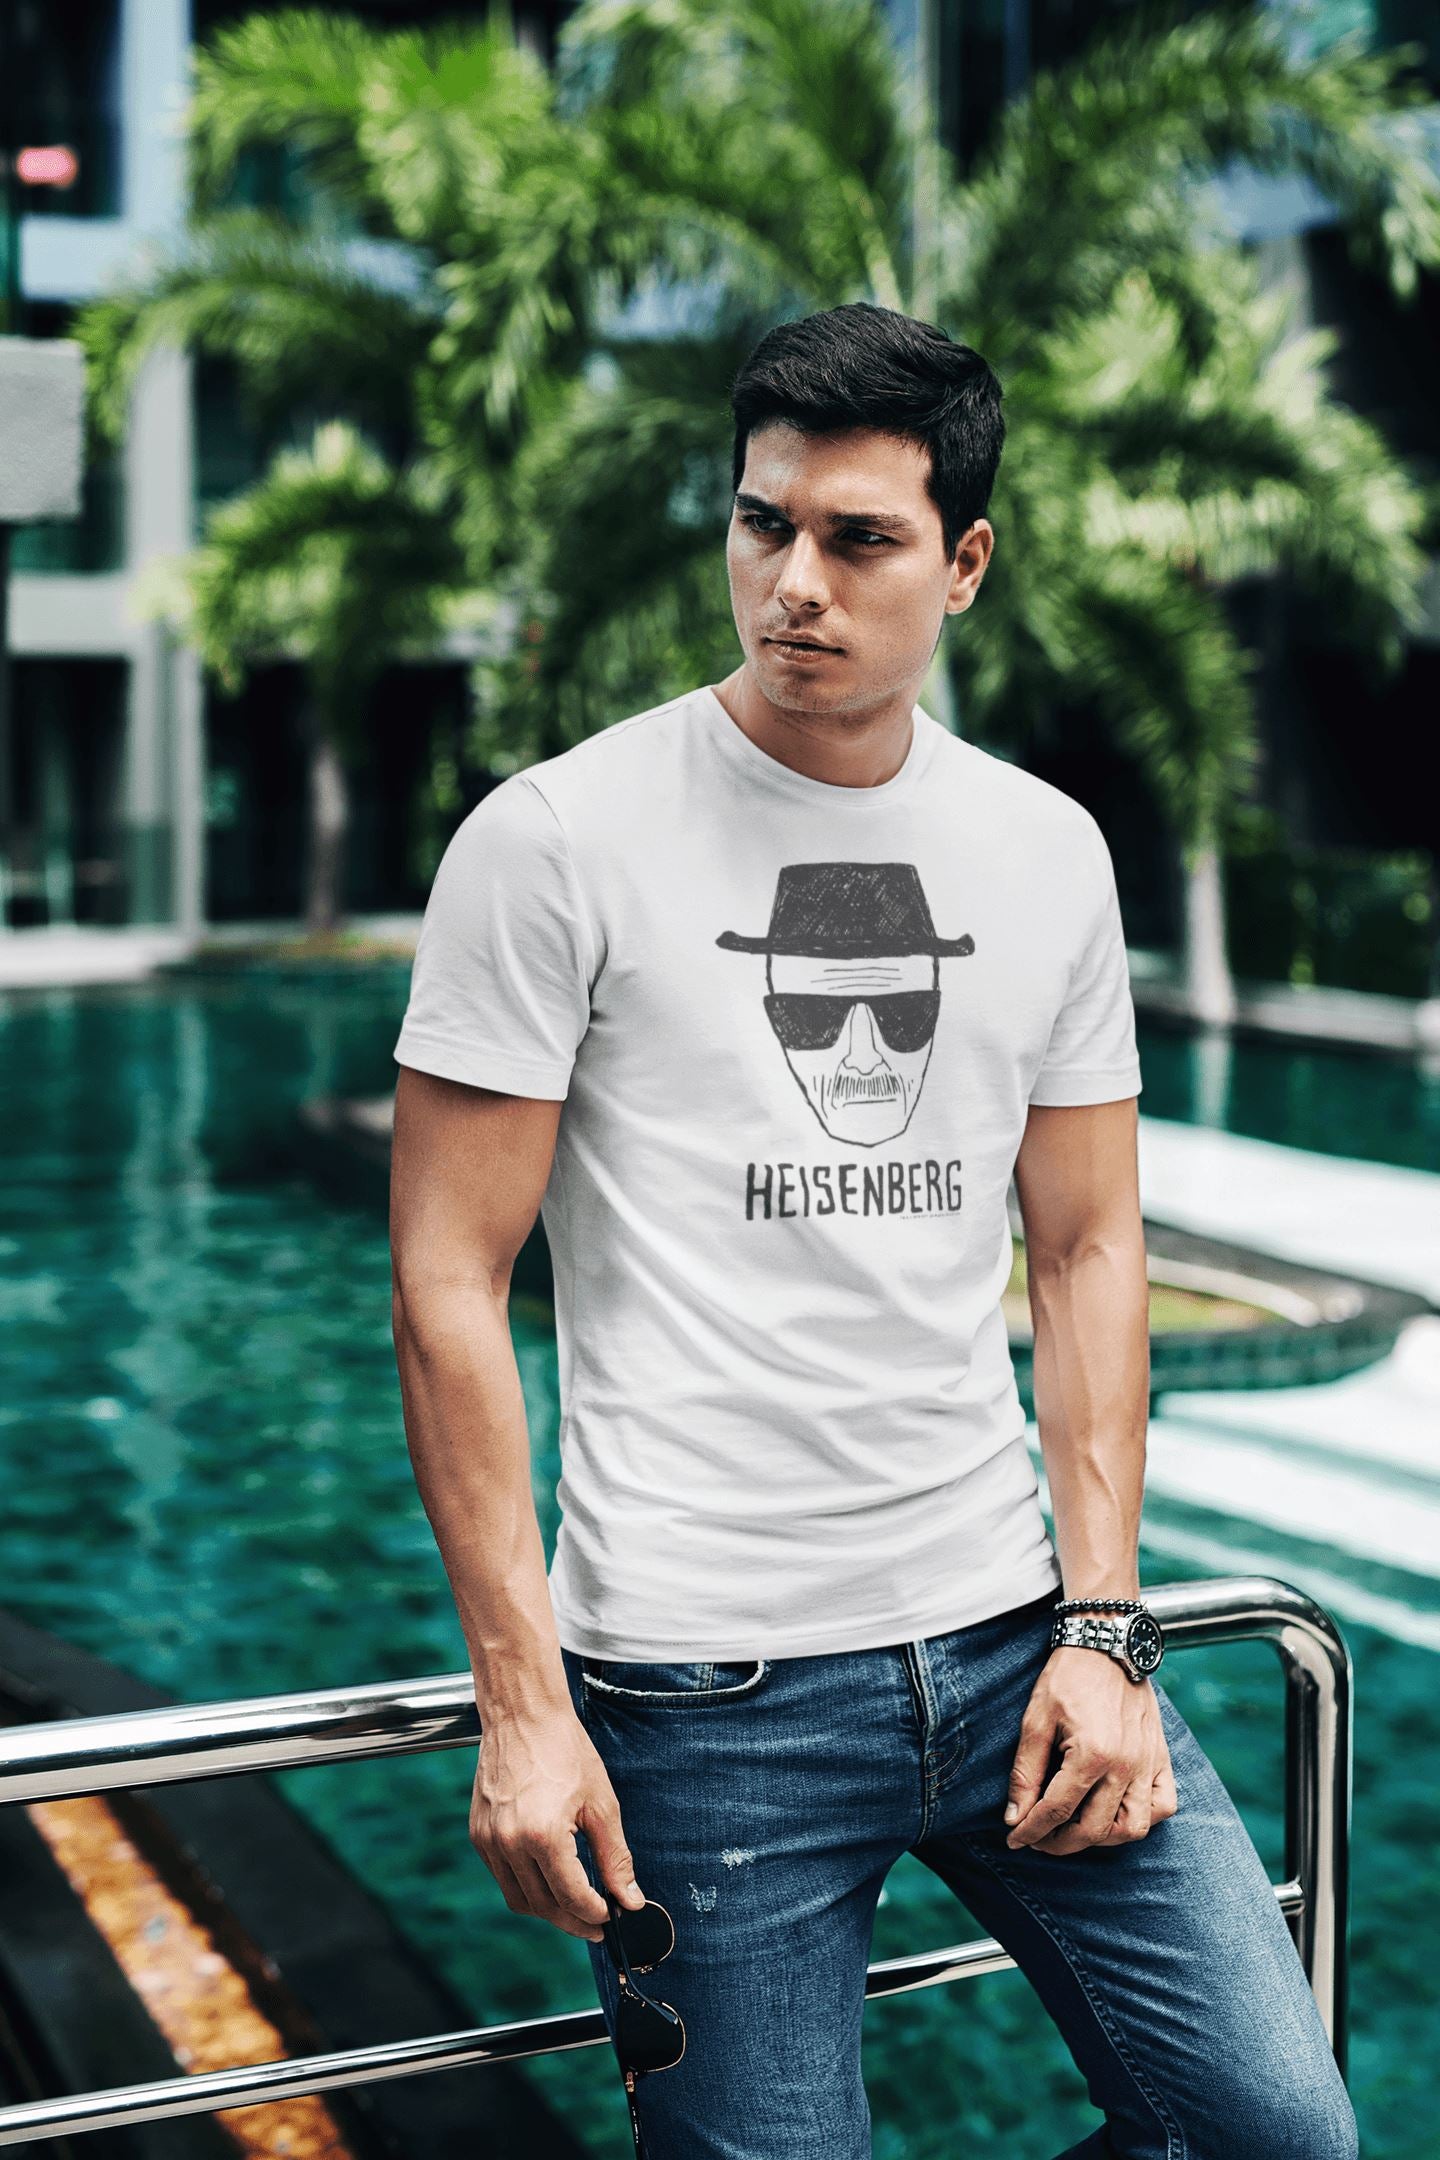 Heisenberg Official Breaking Bad T Shirt for Men and Women | Premium Design | Catch My Drift India - Catch My Drift India  breaking bad, clothing, female, made in india, movies, shirt, t shir